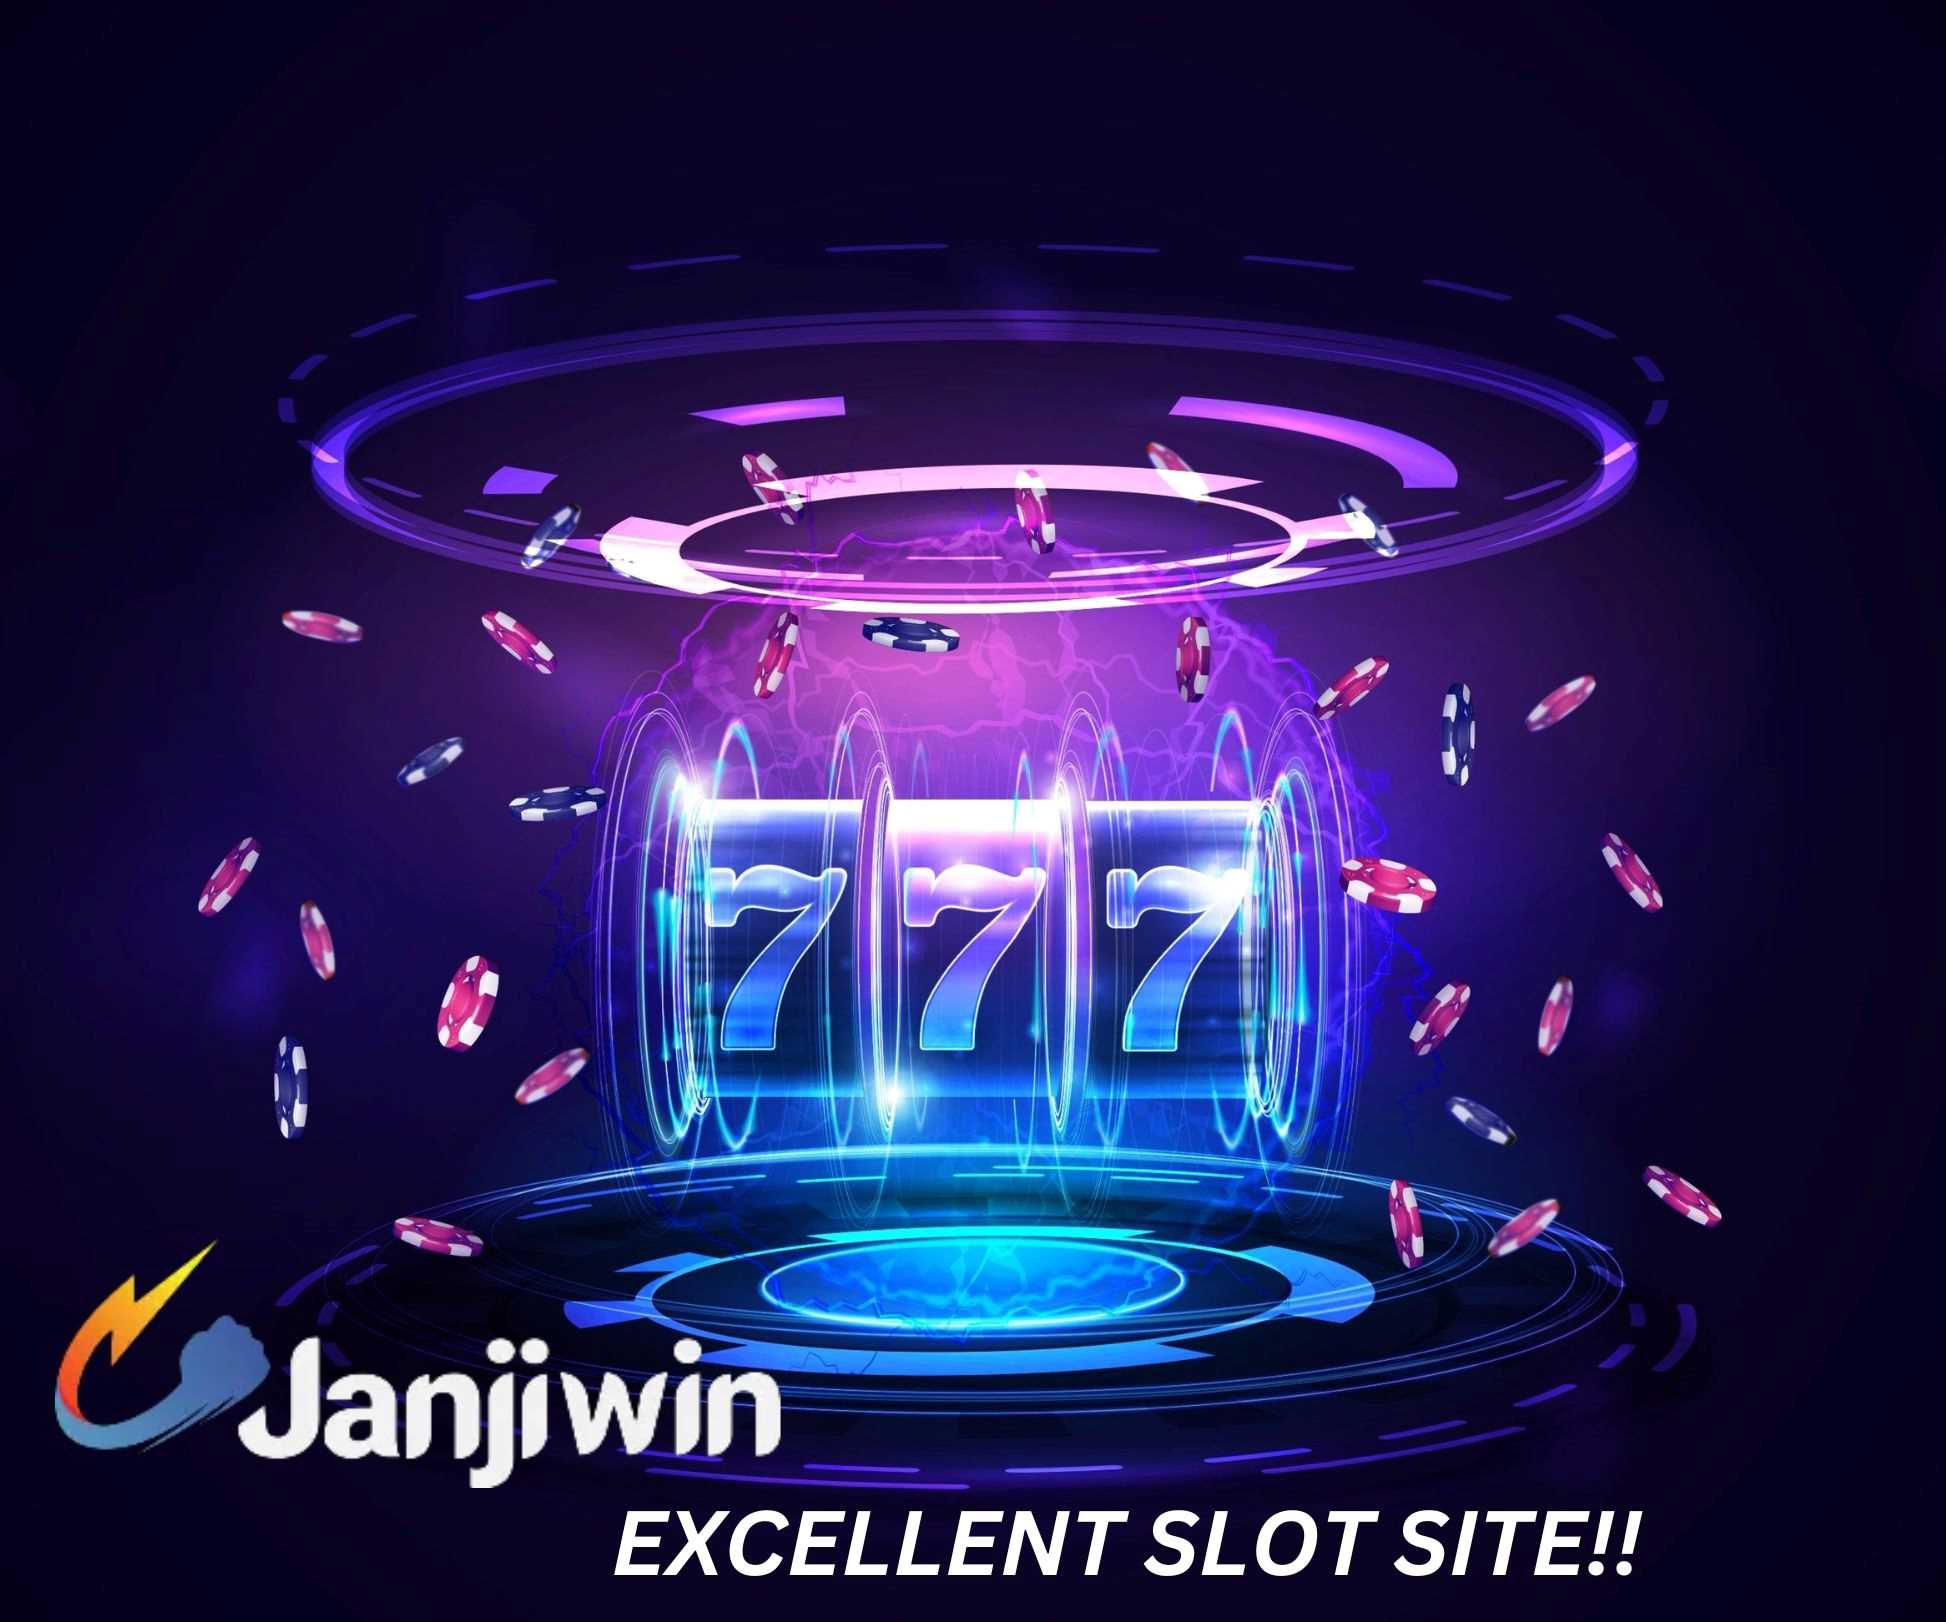 Easy to Win Slot Types on the JANJIWIN site